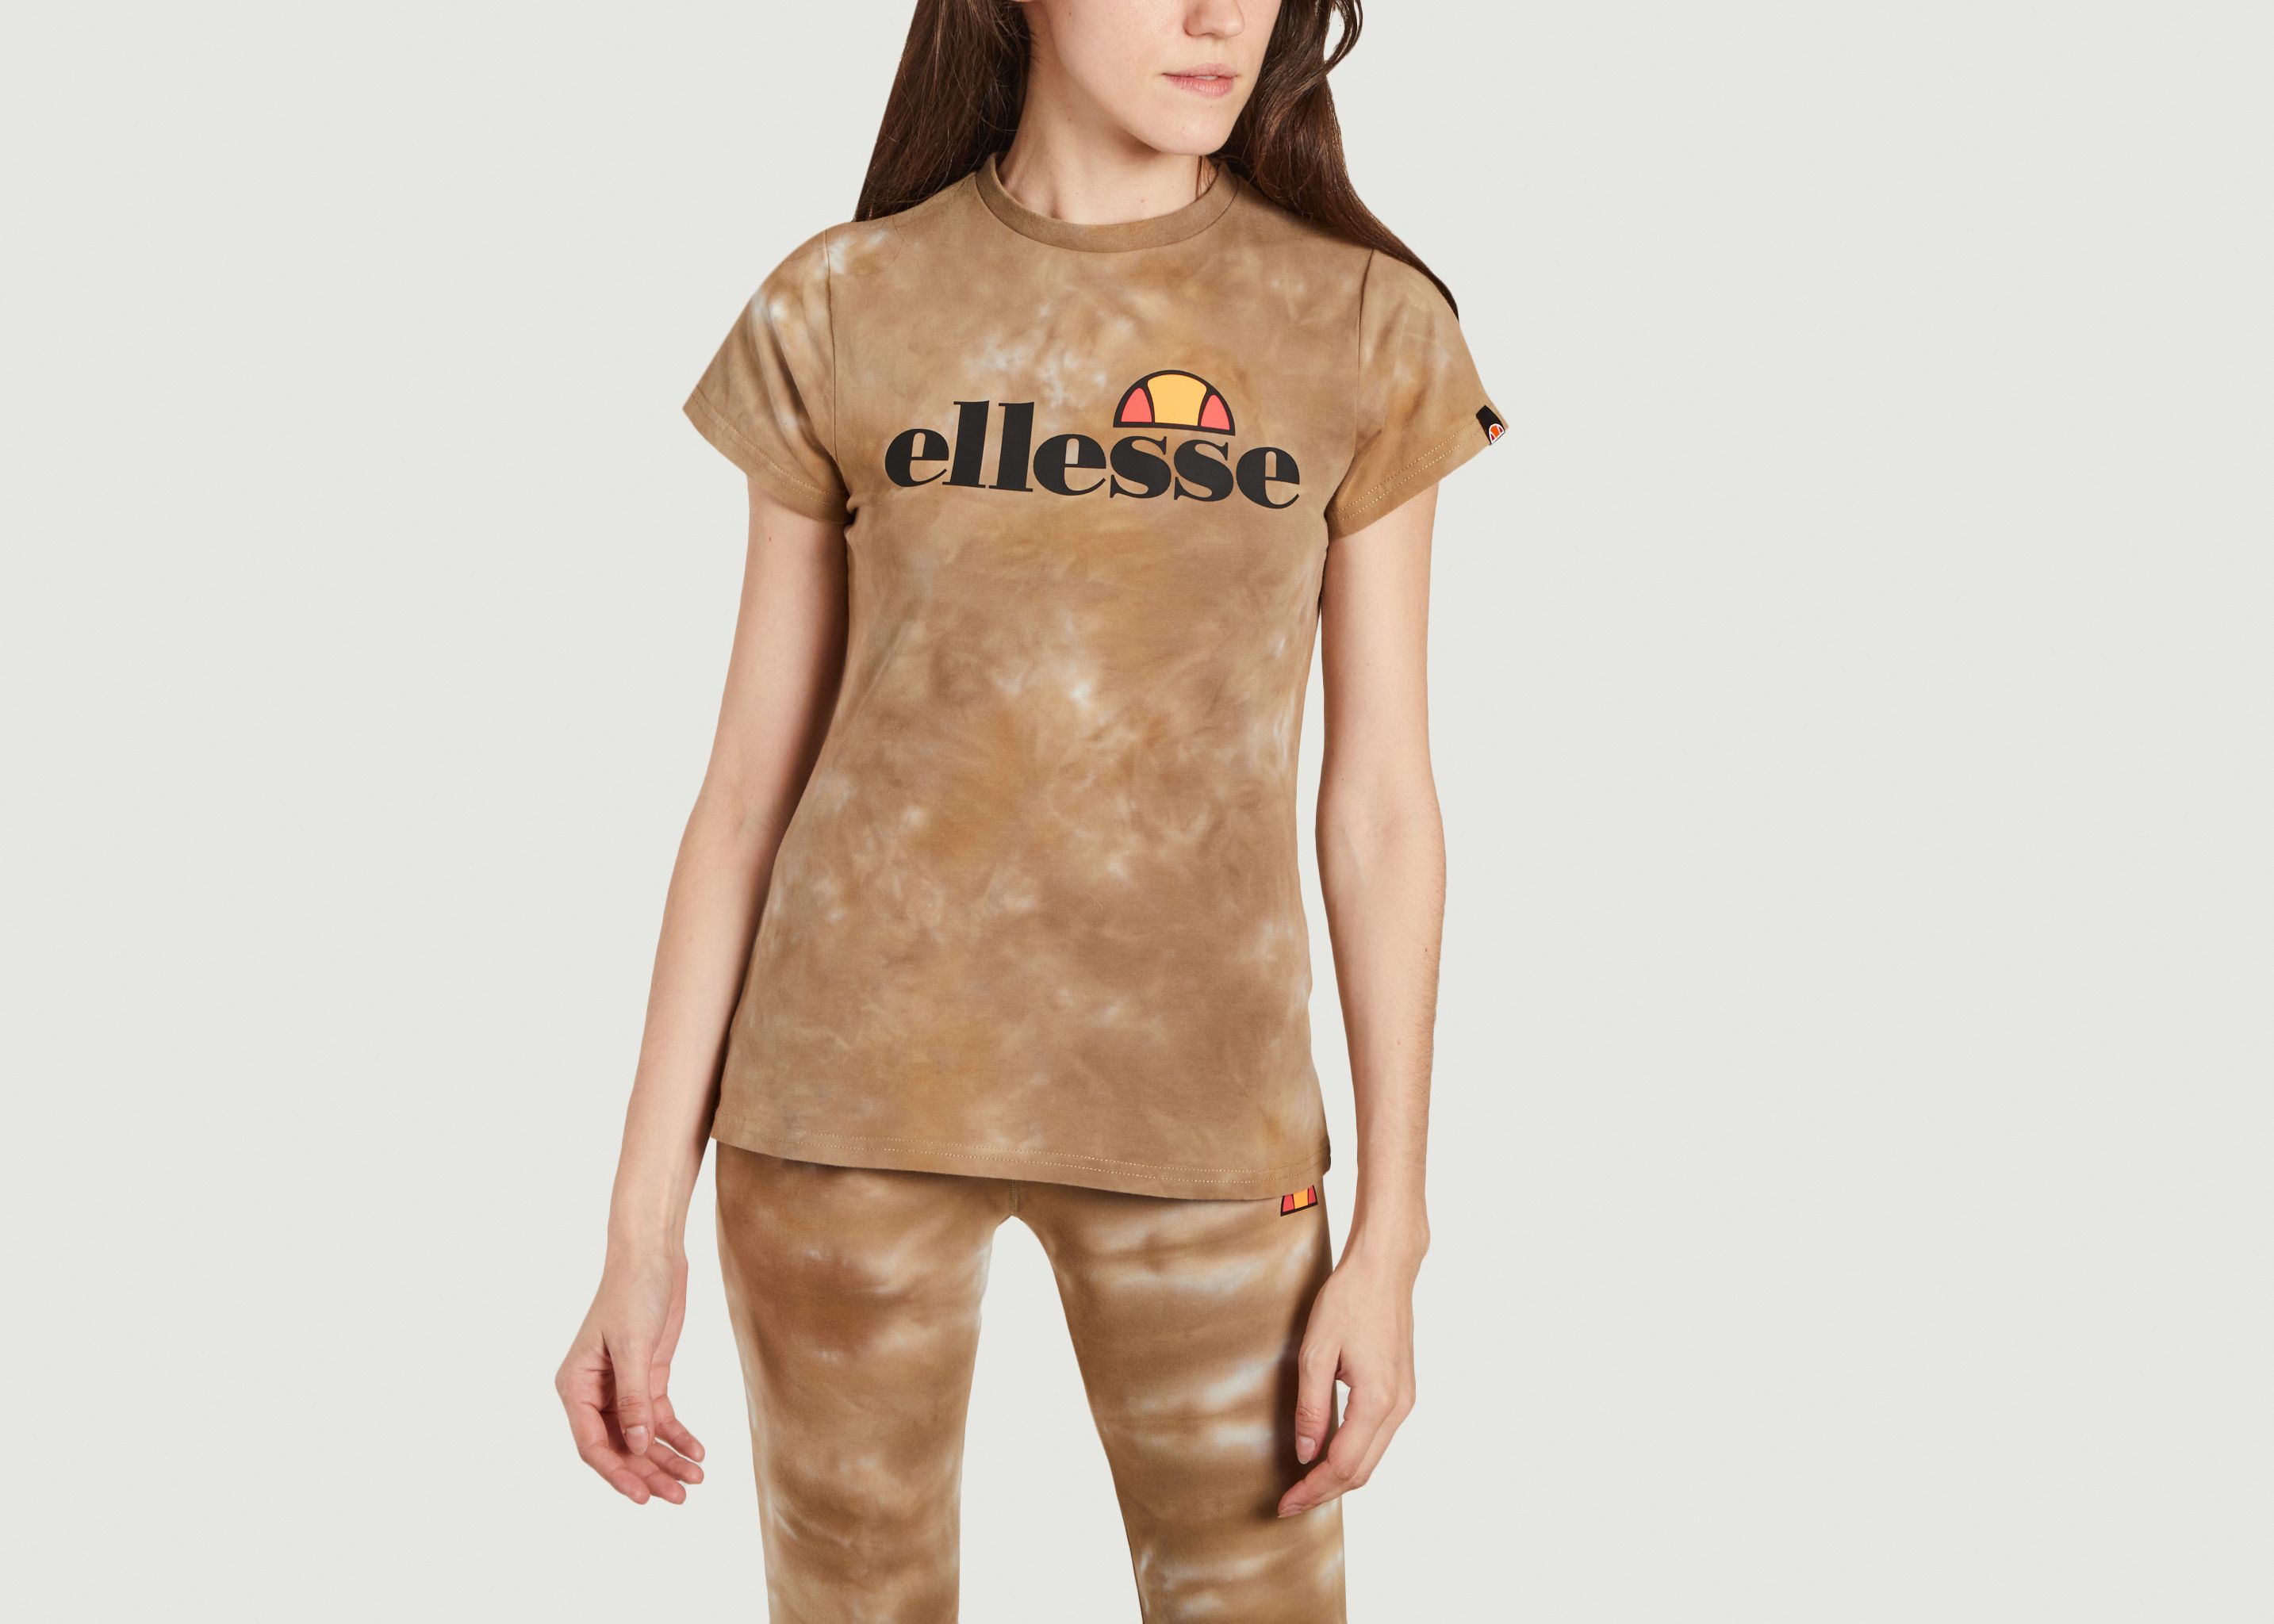 Hayes tie and dye sports t-shirt - Ellesse